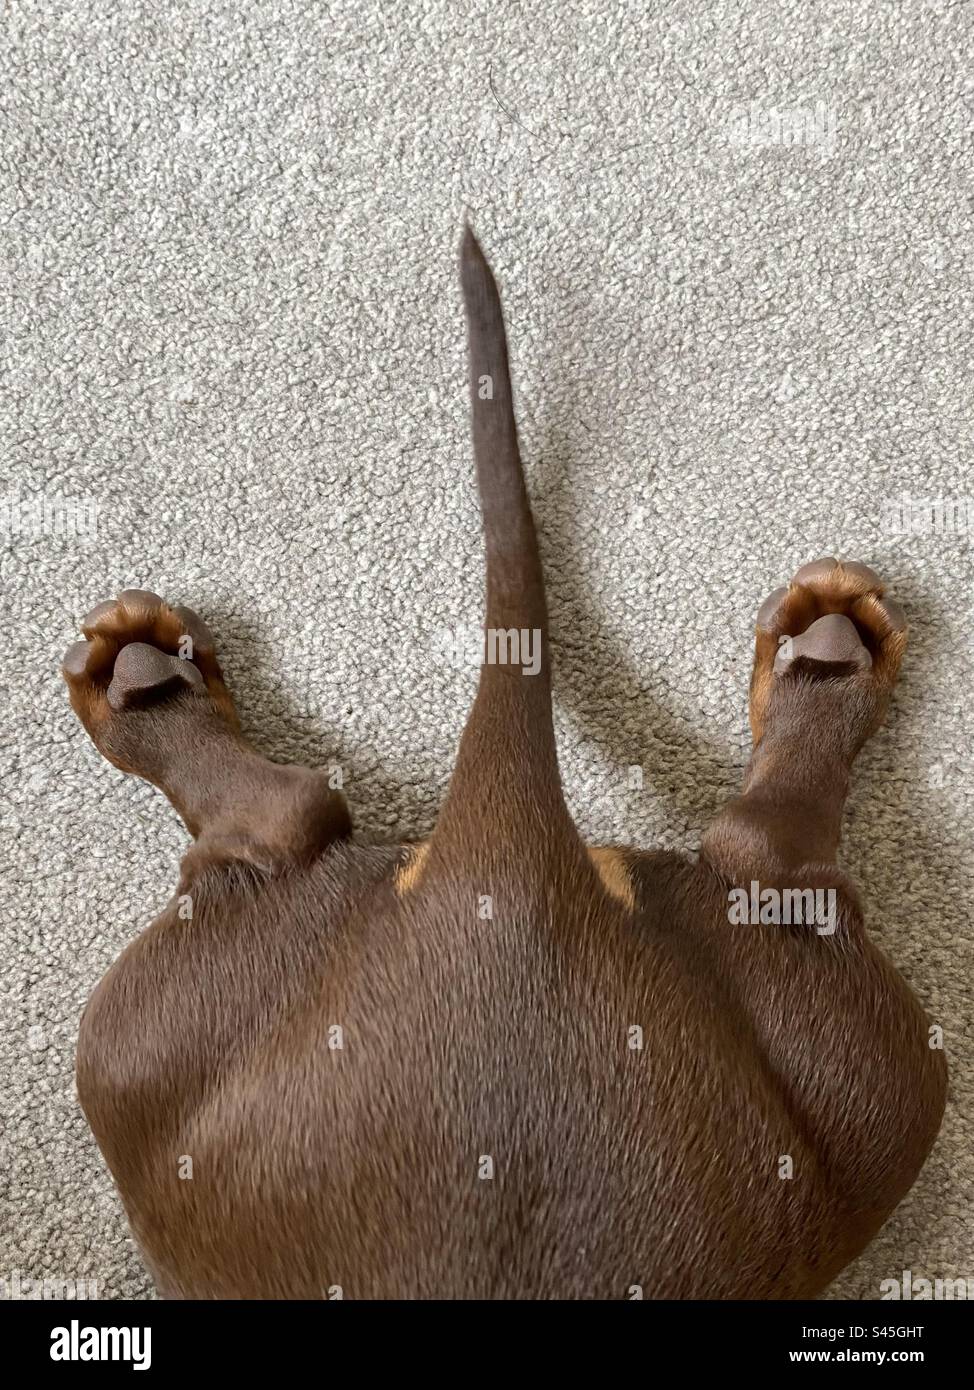 Tail and back legs of 5 month old Dachshund puppy Stock Photo